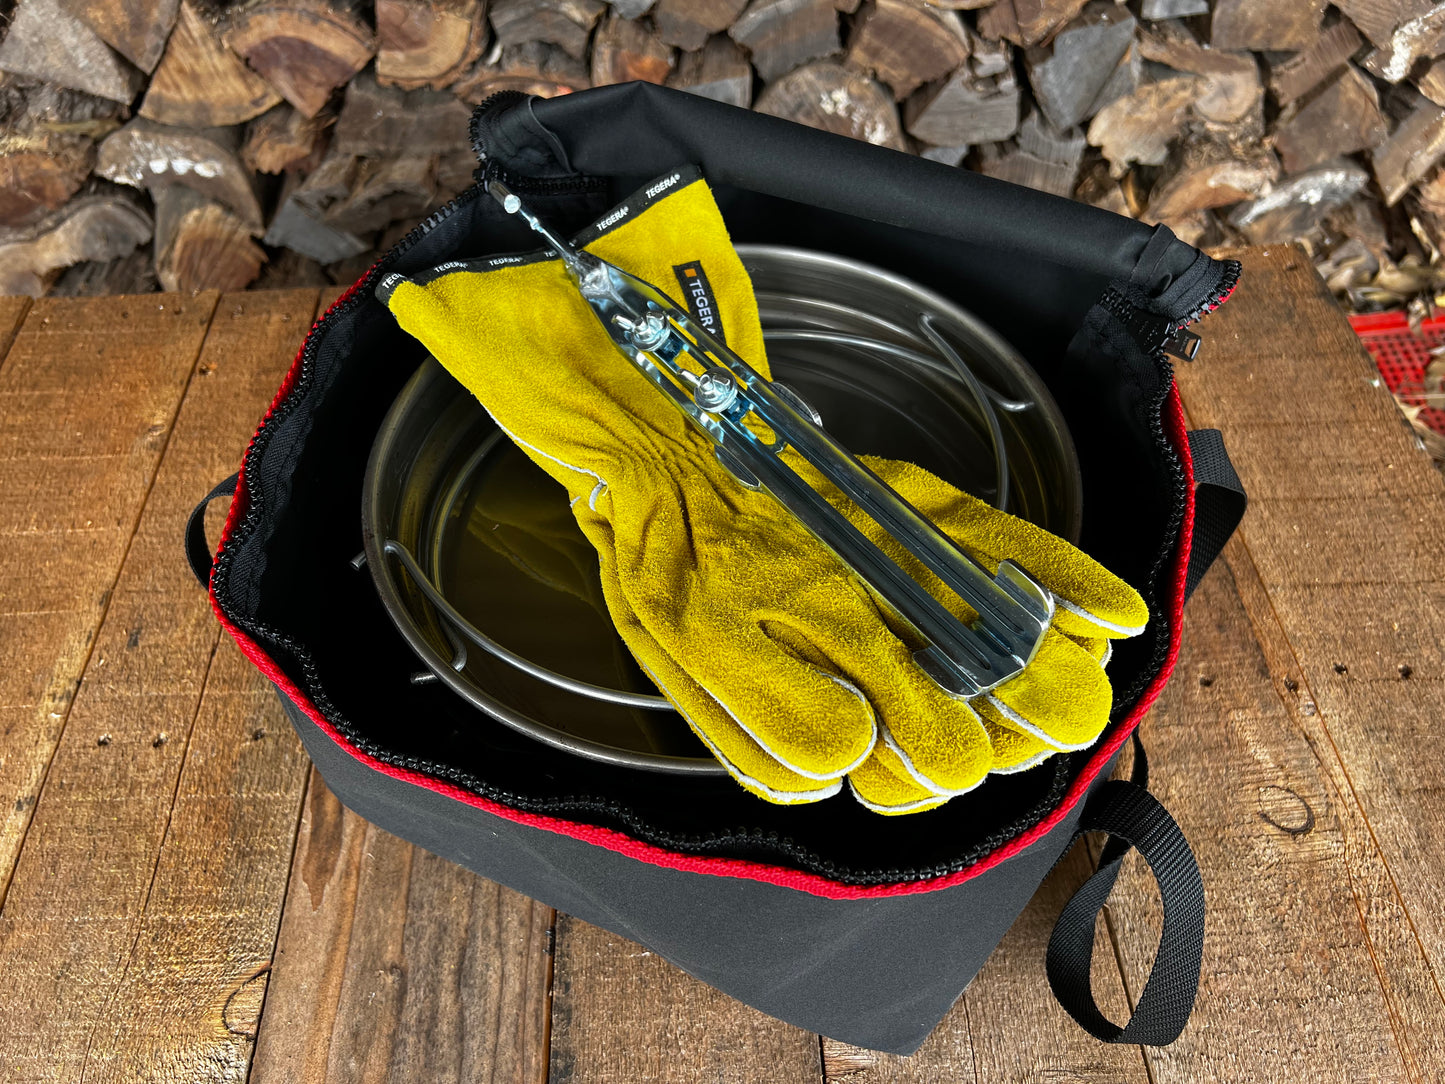 CAMP OVEN PIZZA COOKING SET